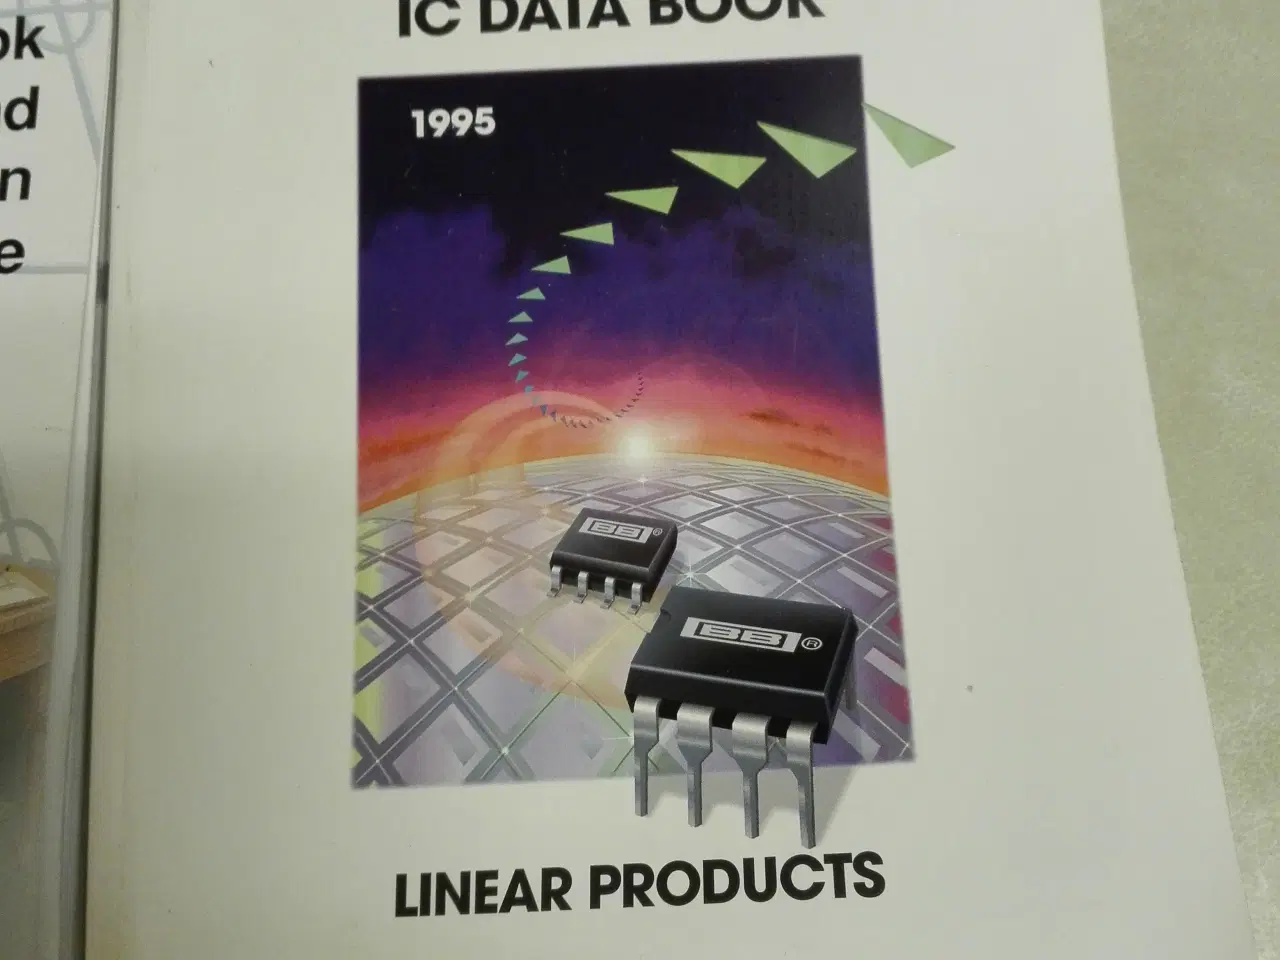 Billede 2 - IC Data Book, Data Acquisition Products